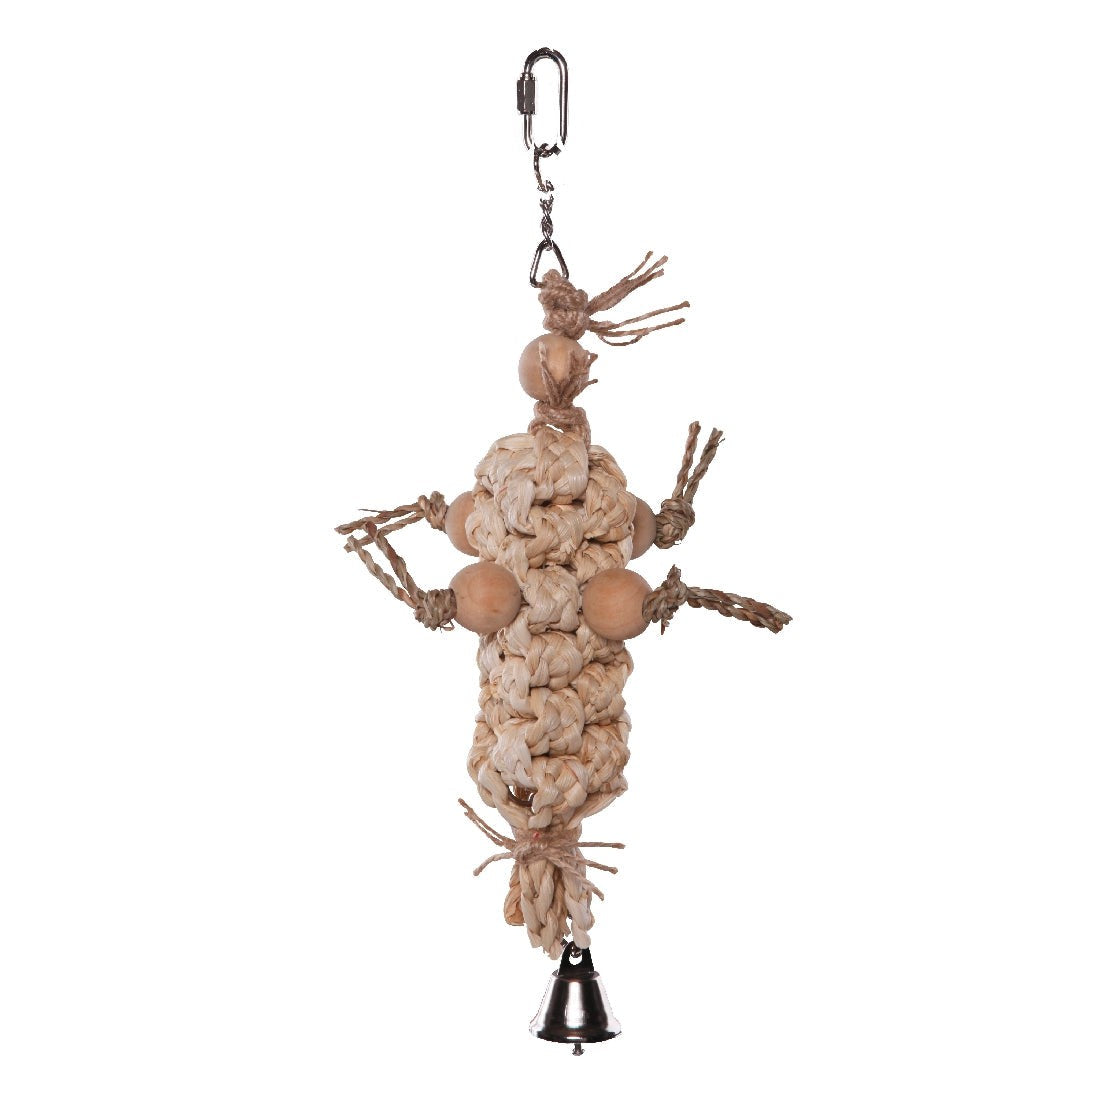 Natural woven bird toy with knotted ropes and wooden beads.